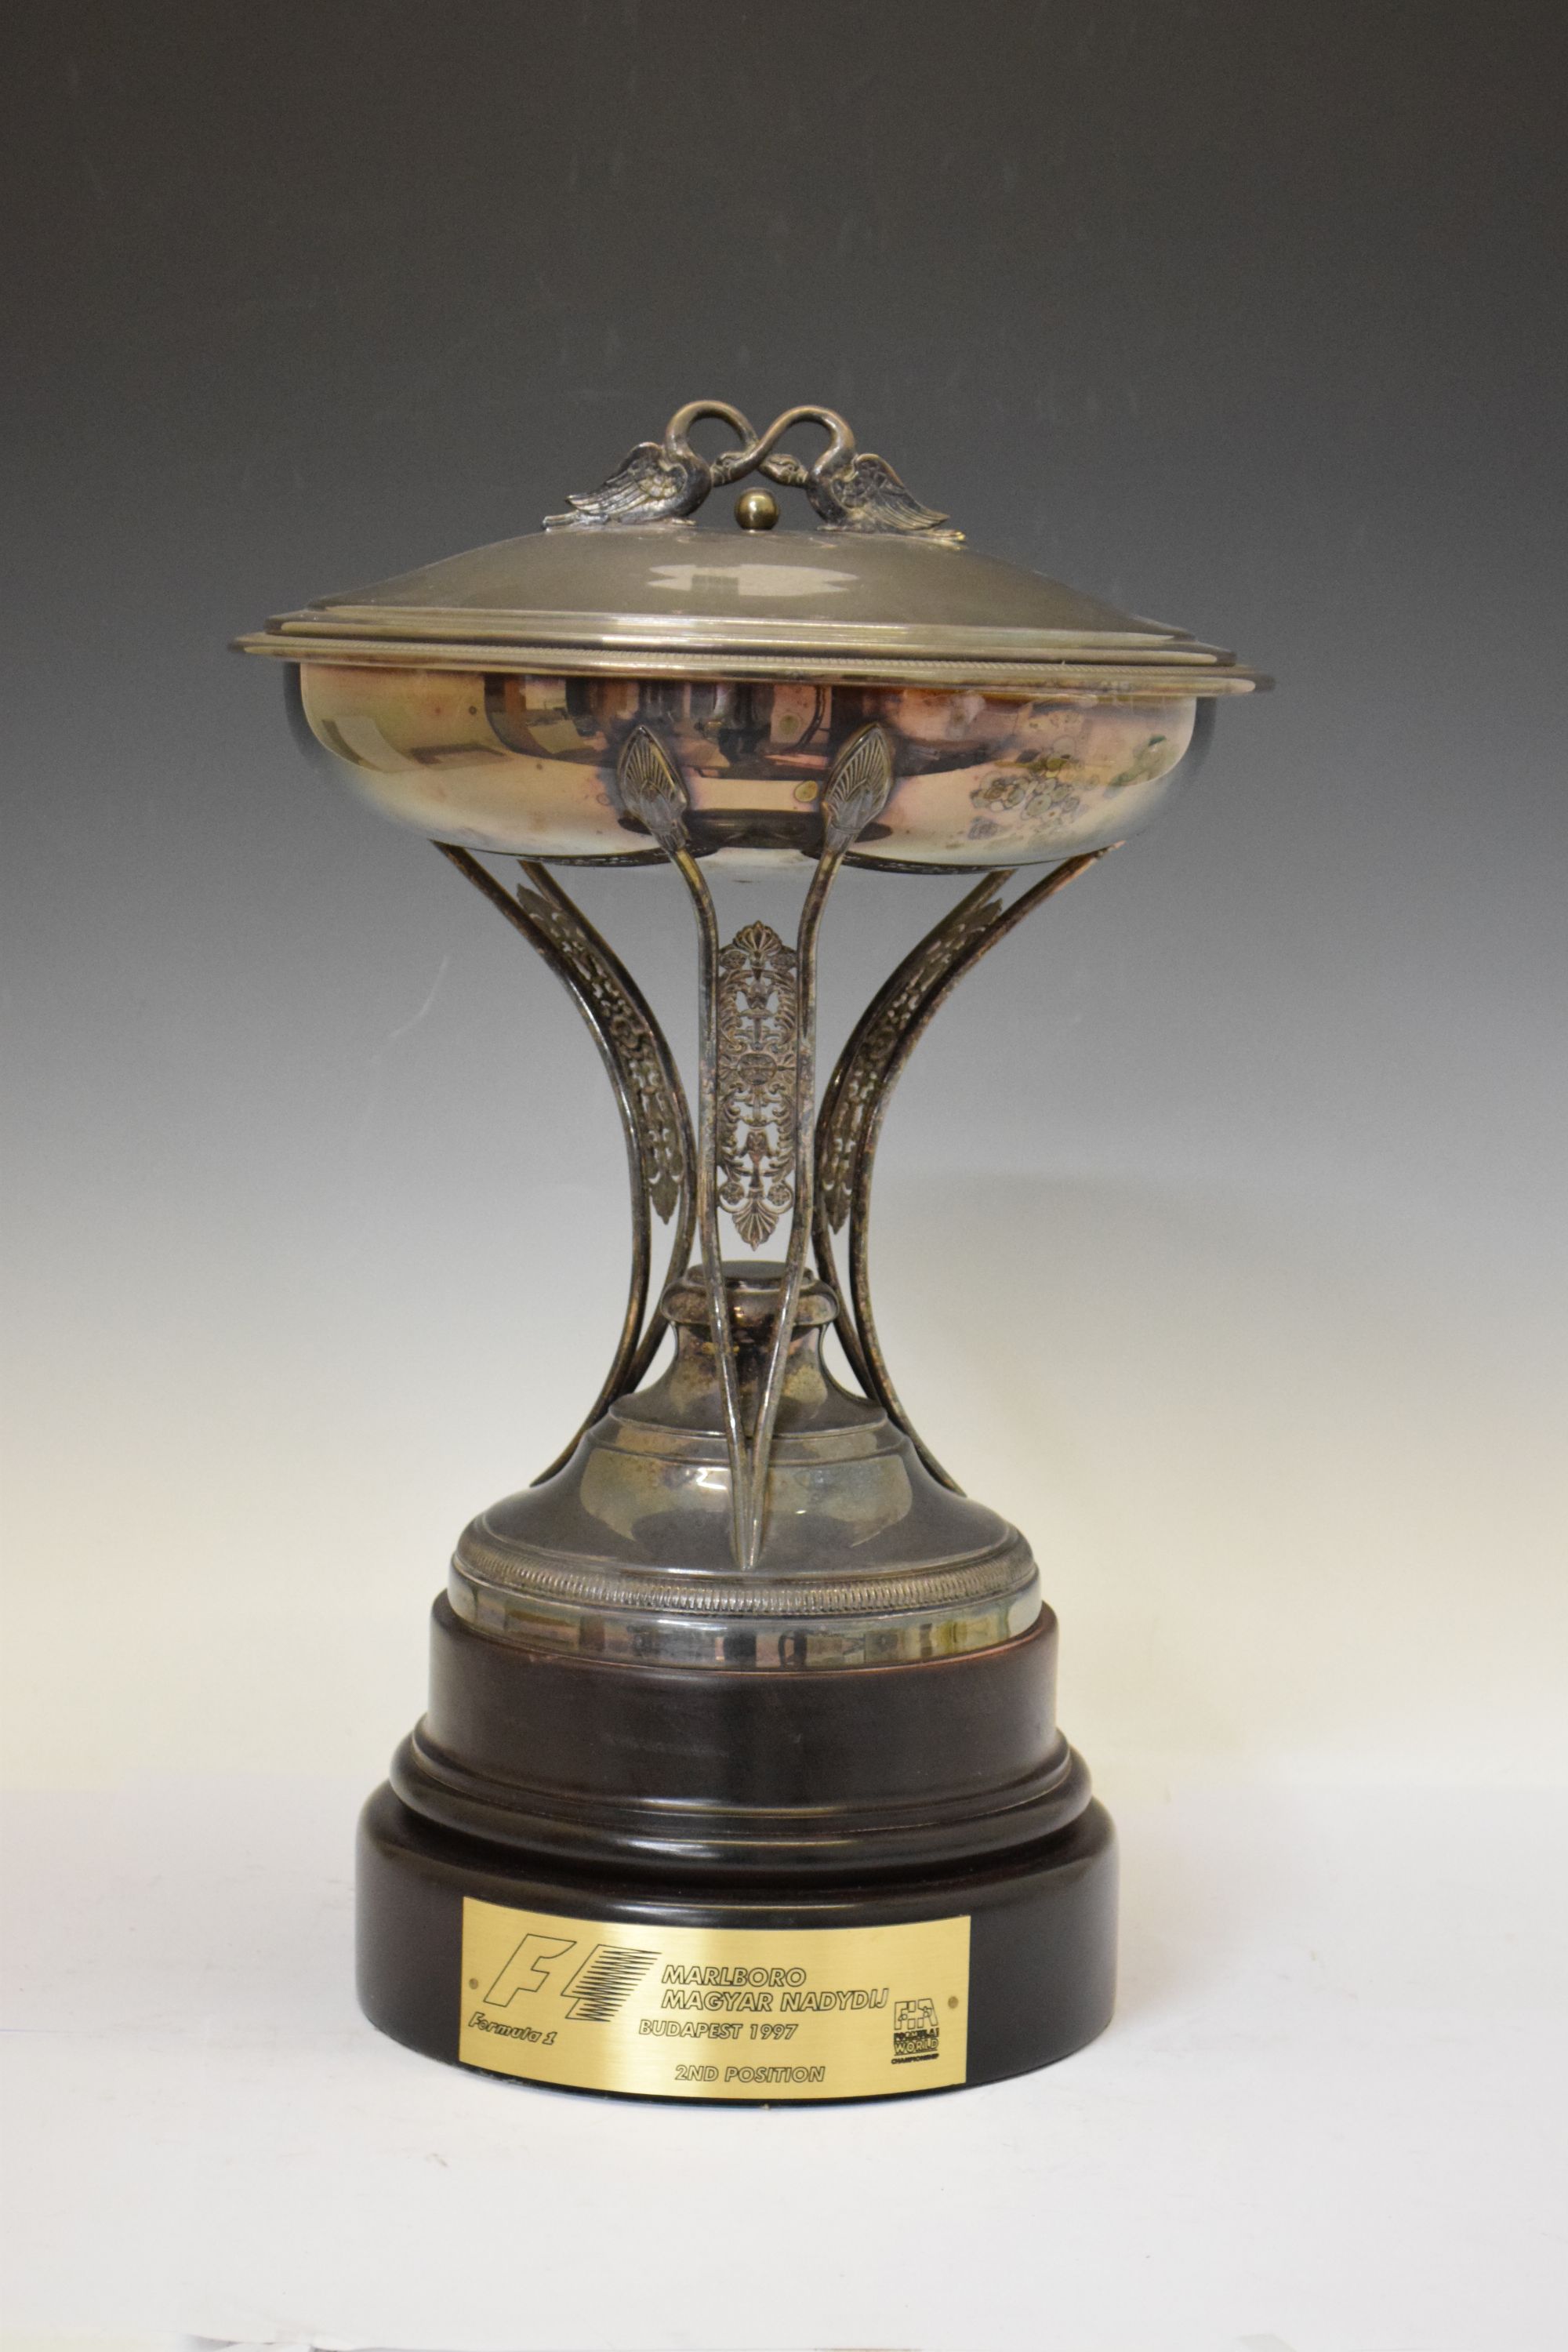 Lot 355 - F1 Interest - Silver plated trophy presented